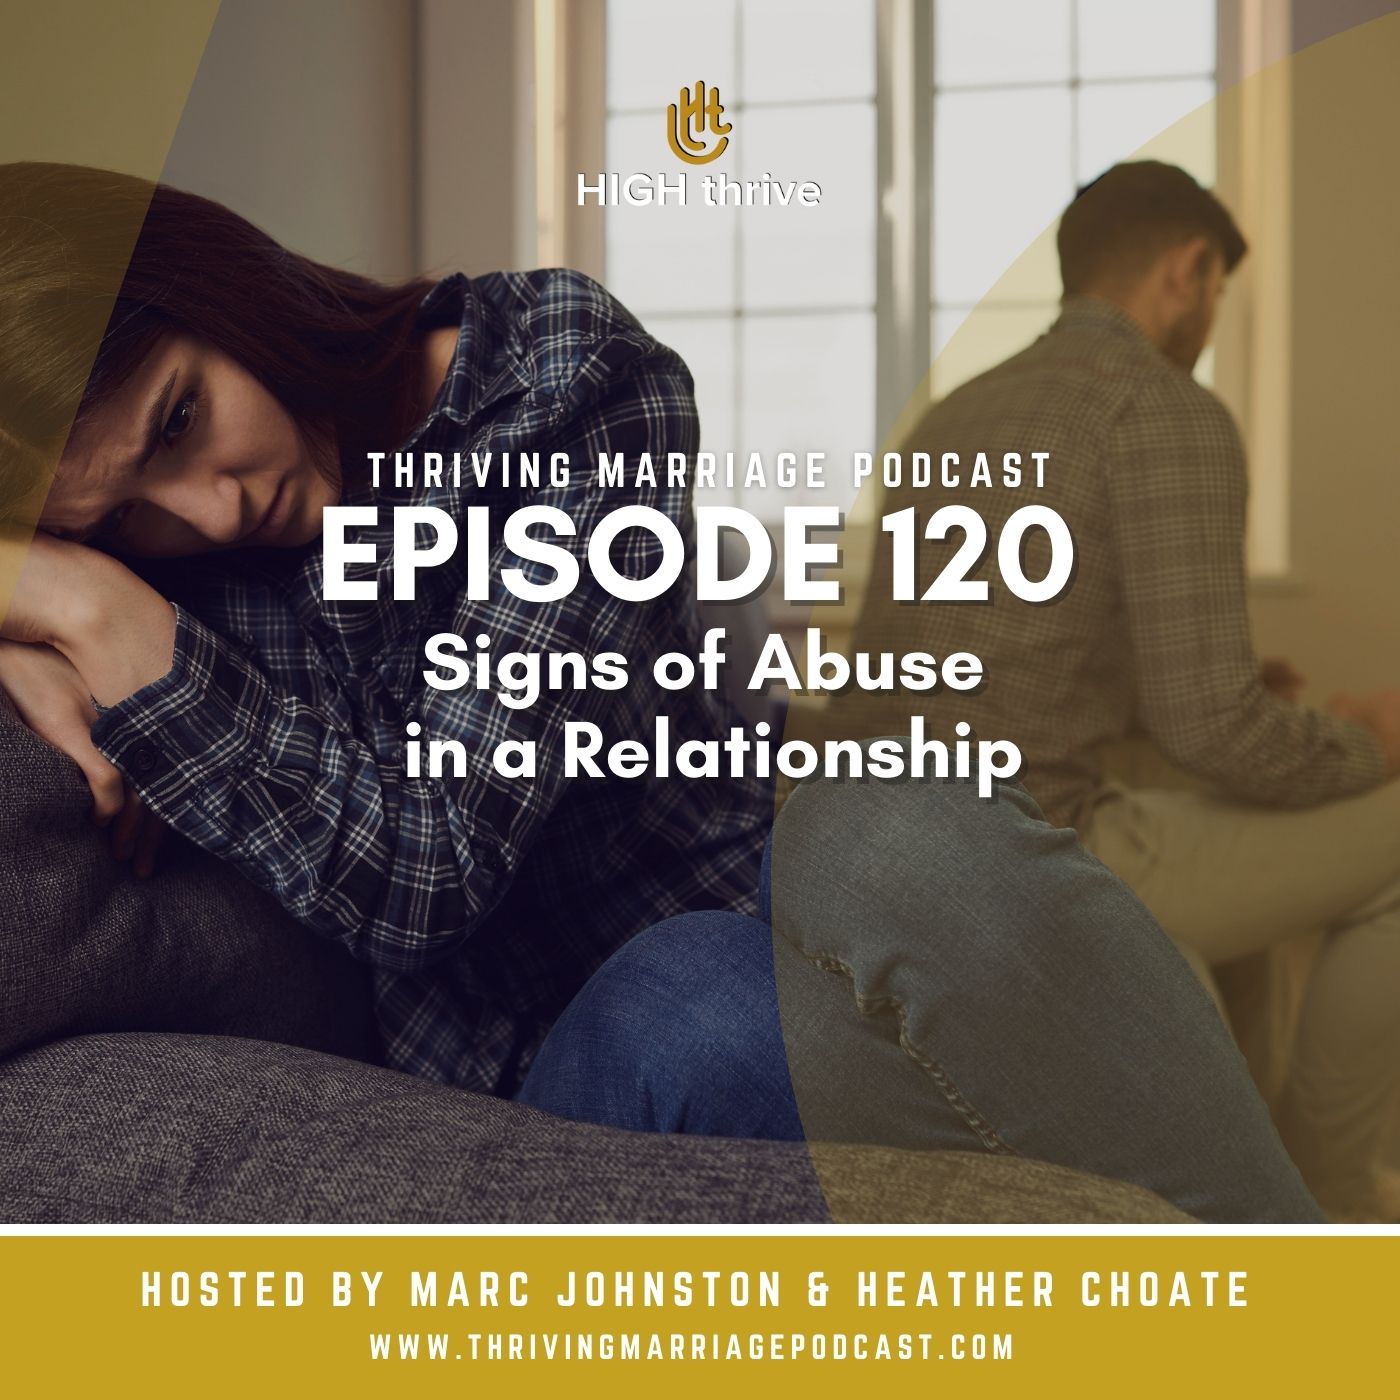 Episode 120: Signs of Abuse in a Relationship